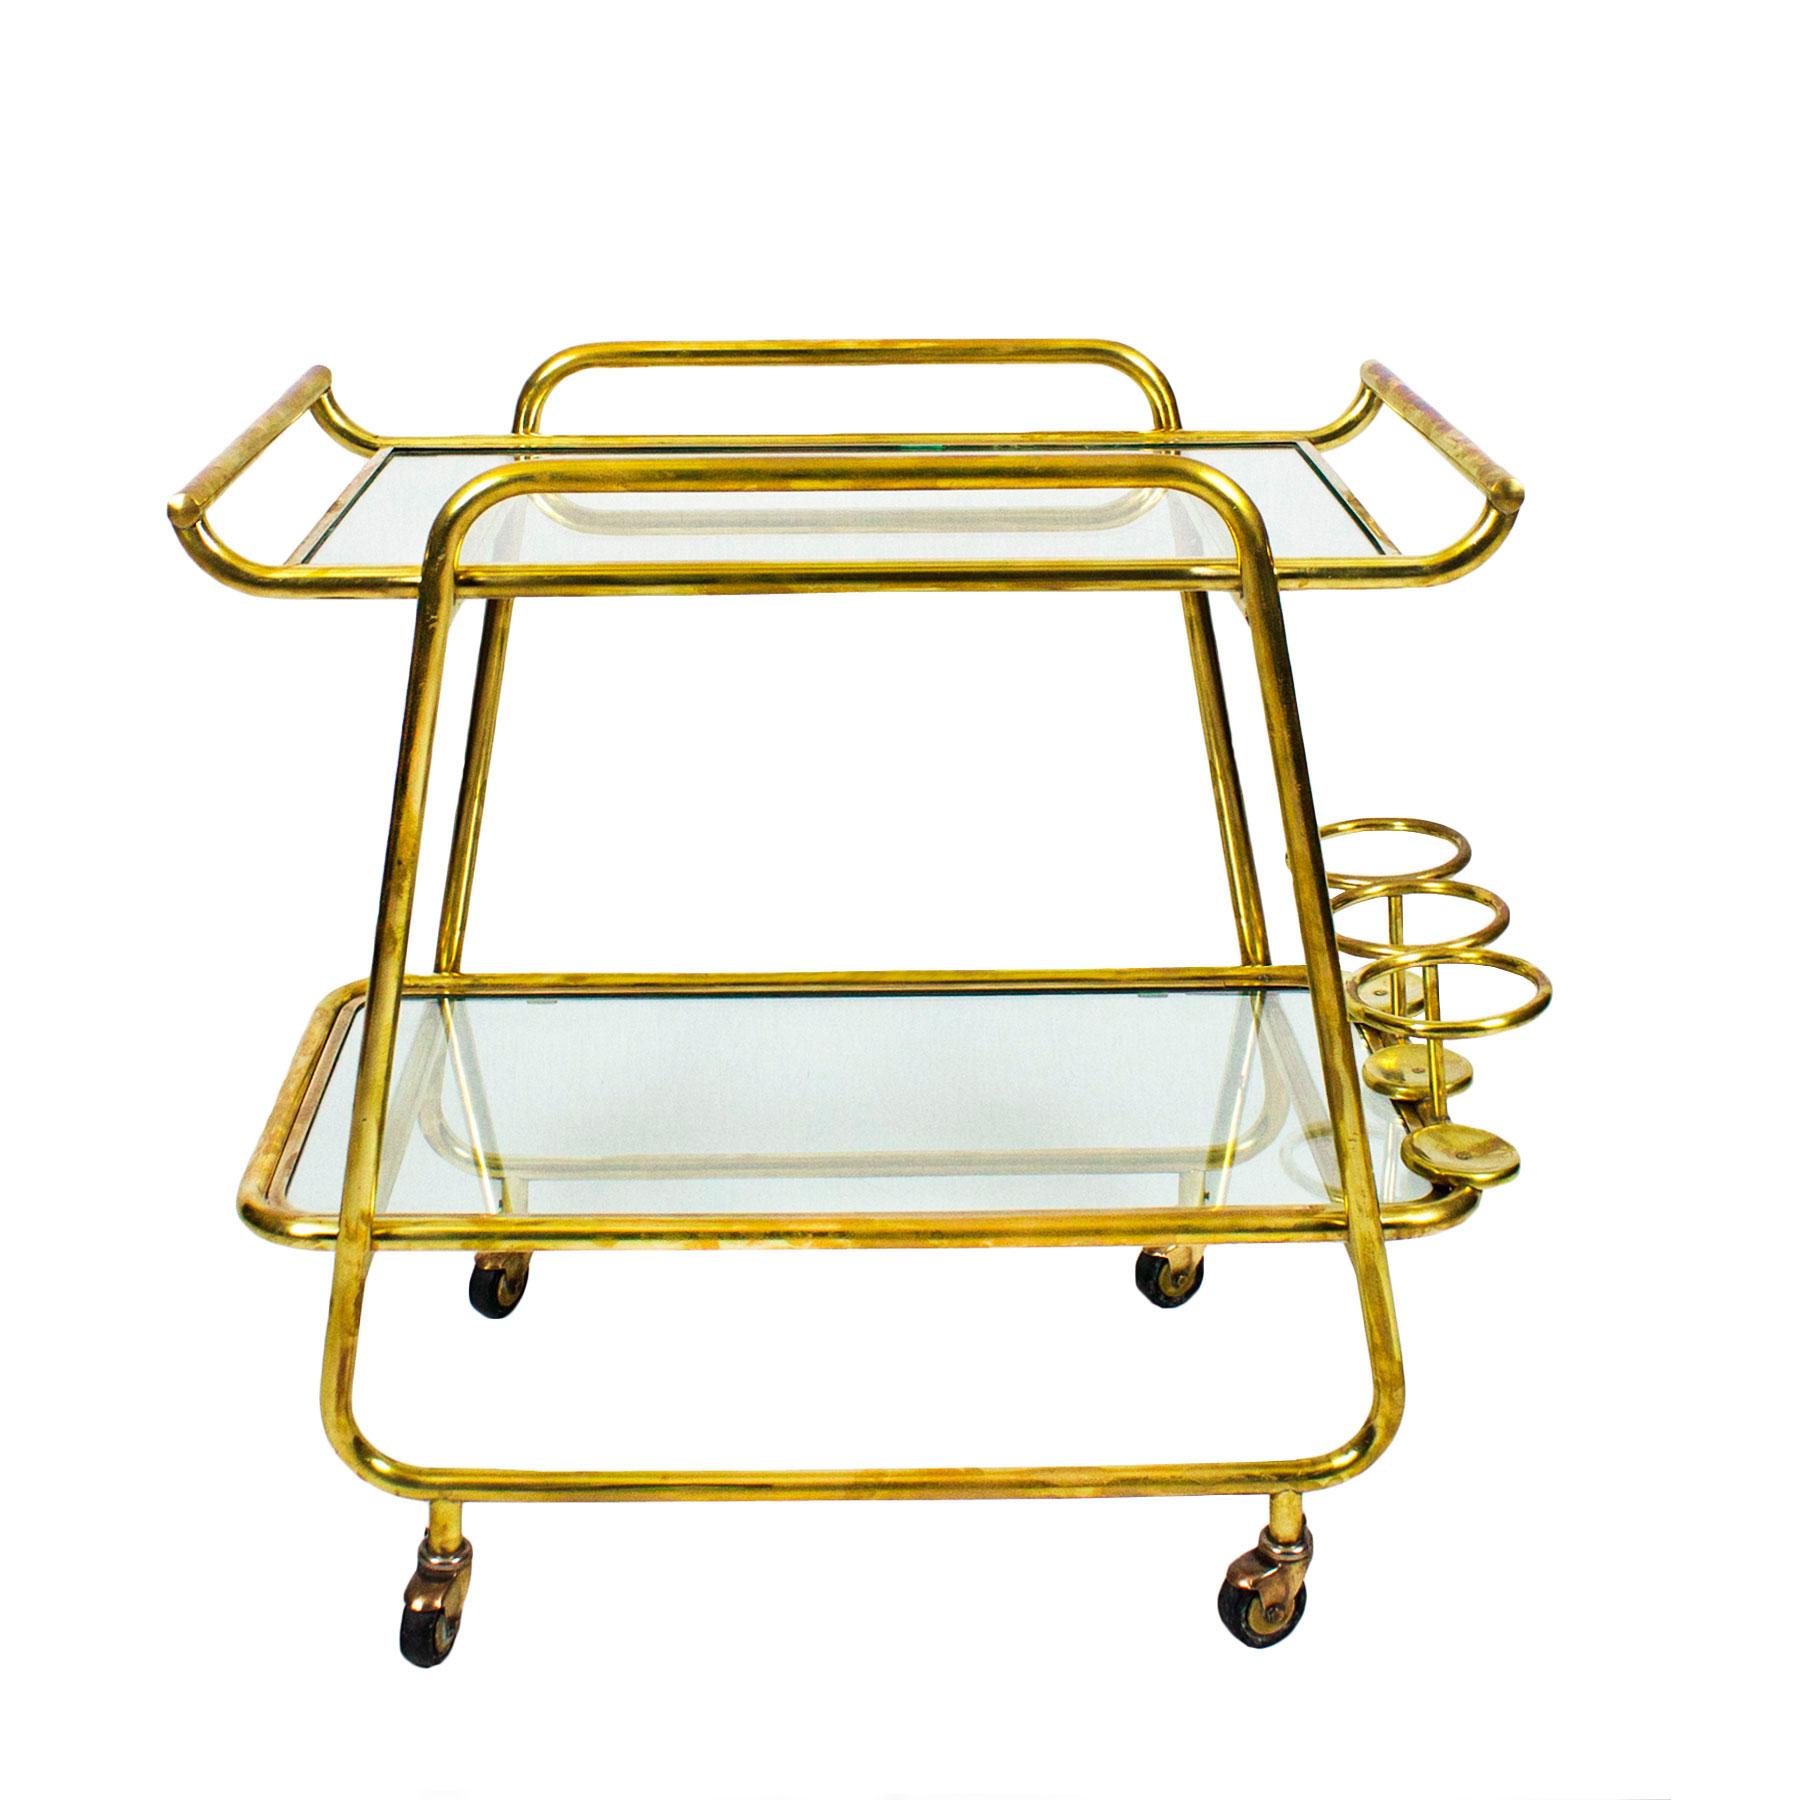 Mid-20th Century 1930s Art Deco Bar Cart, Polished Brass and Glass, Bottles Rack, Italy